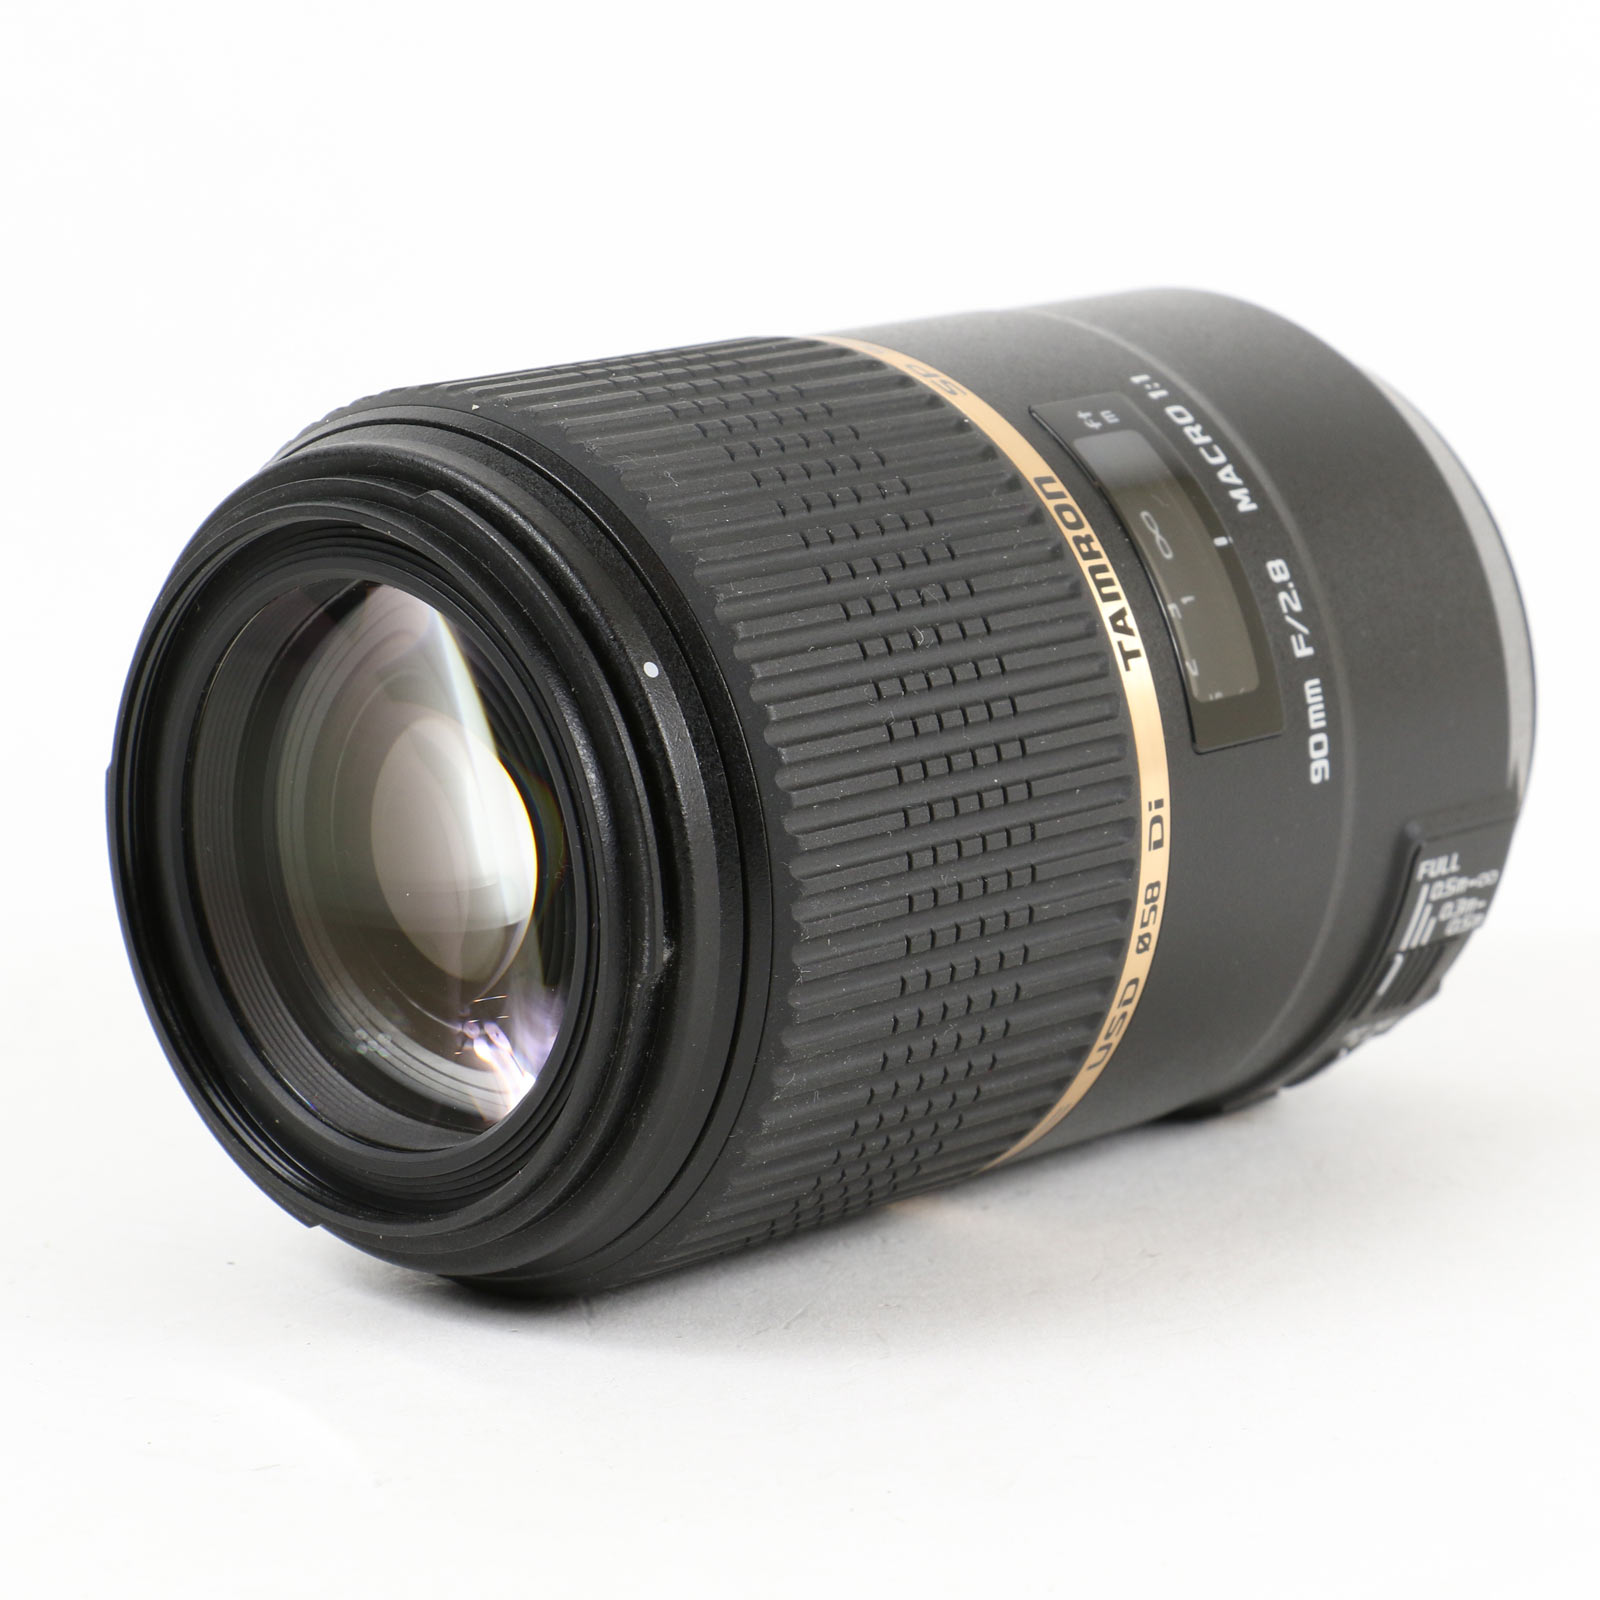 Tamron 90mm f2.8 SP Di USD VC Macro Lens - Sony Fit | Wex Photo Video